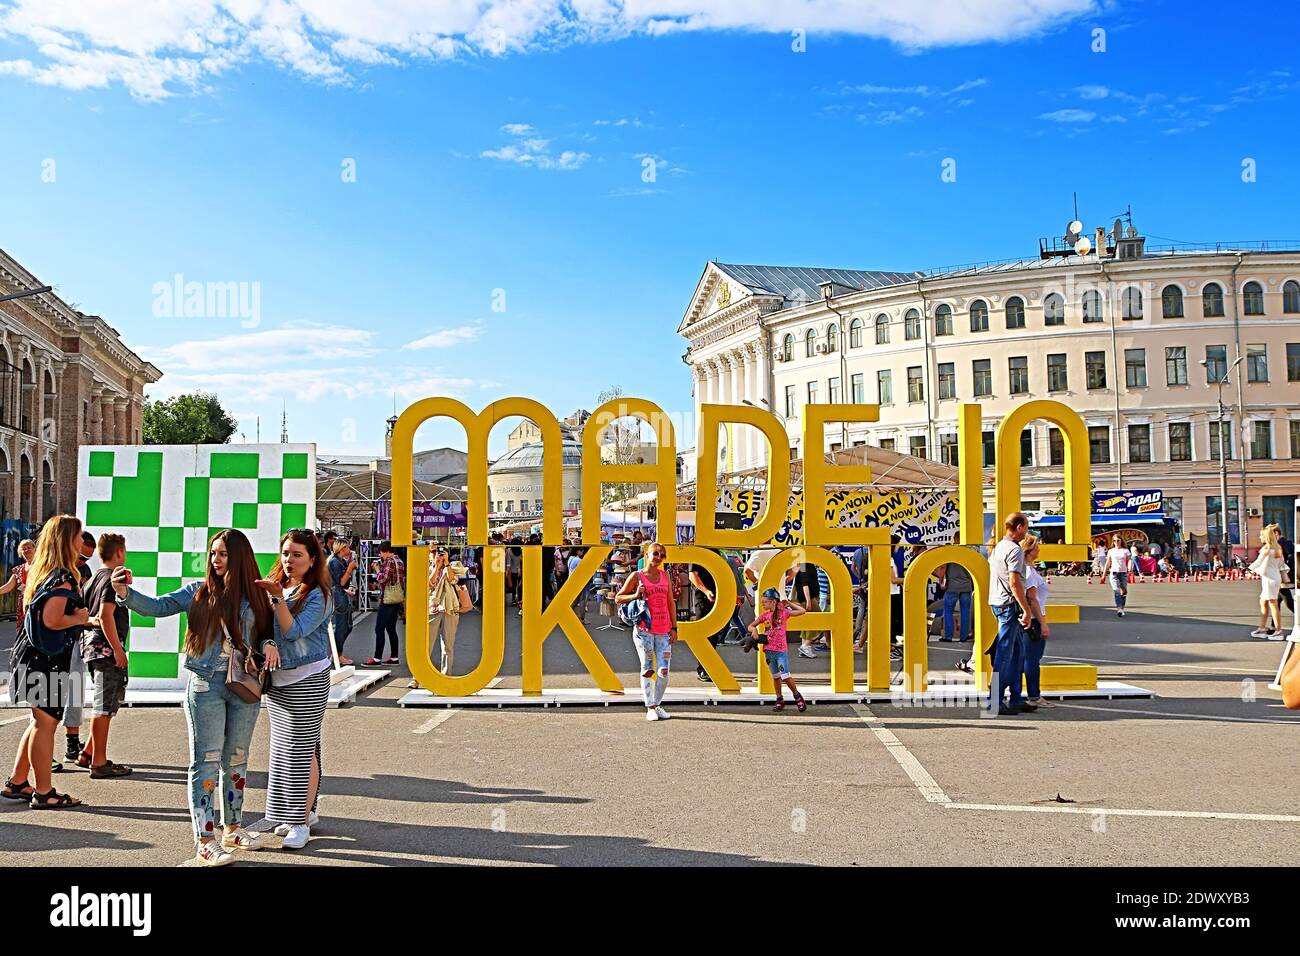 KYIV, UKRAINE - JULY 13, 2019: People at the fair near title MADE IN UKRAINE, a street market festival at the weekend, crafts fairs Stock Photo